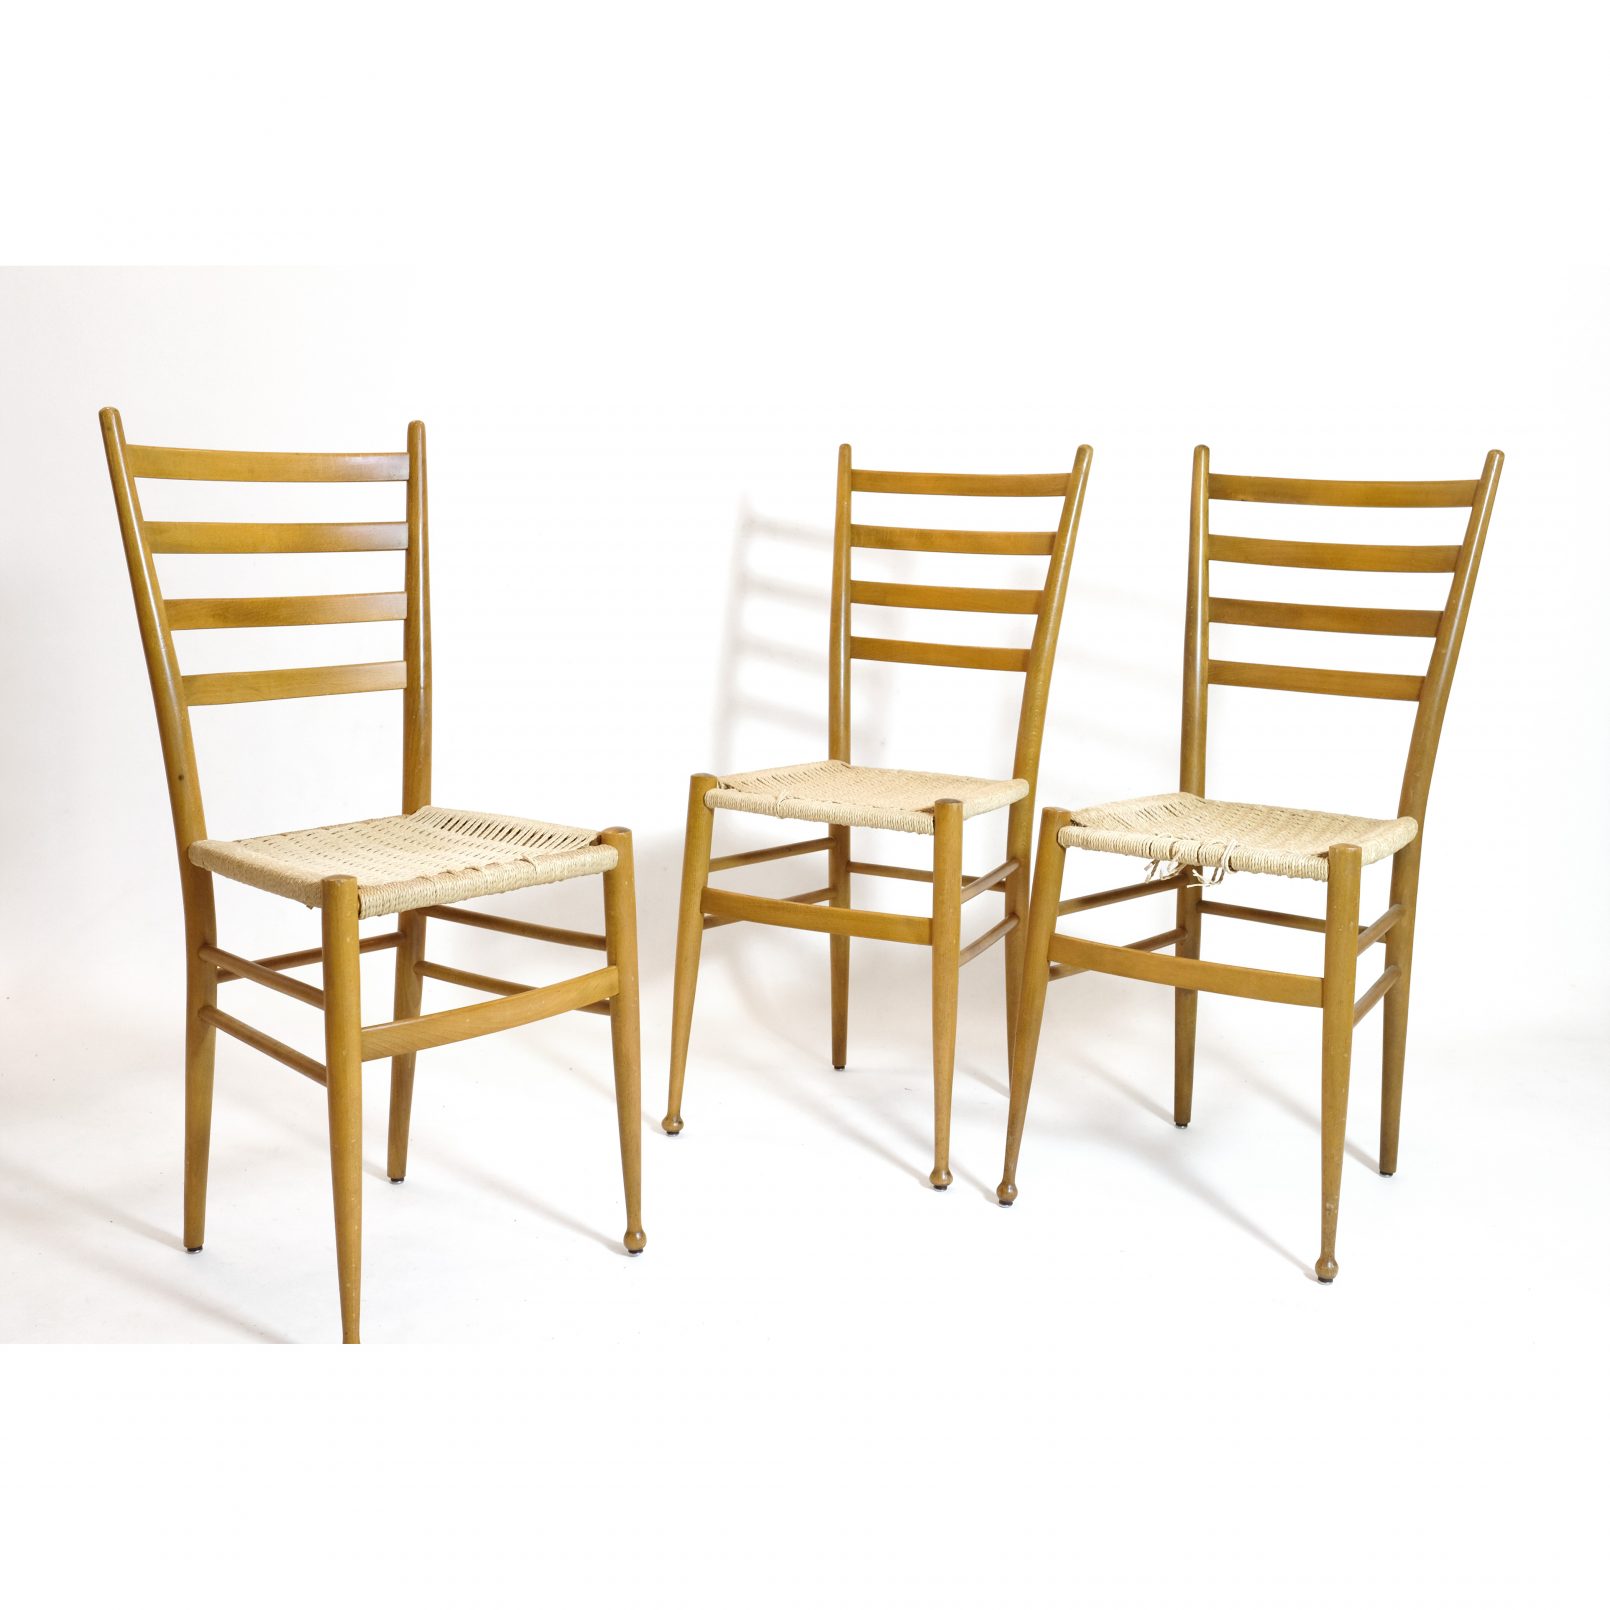 Set of three Italian chairs, wood and rope, 1950s.